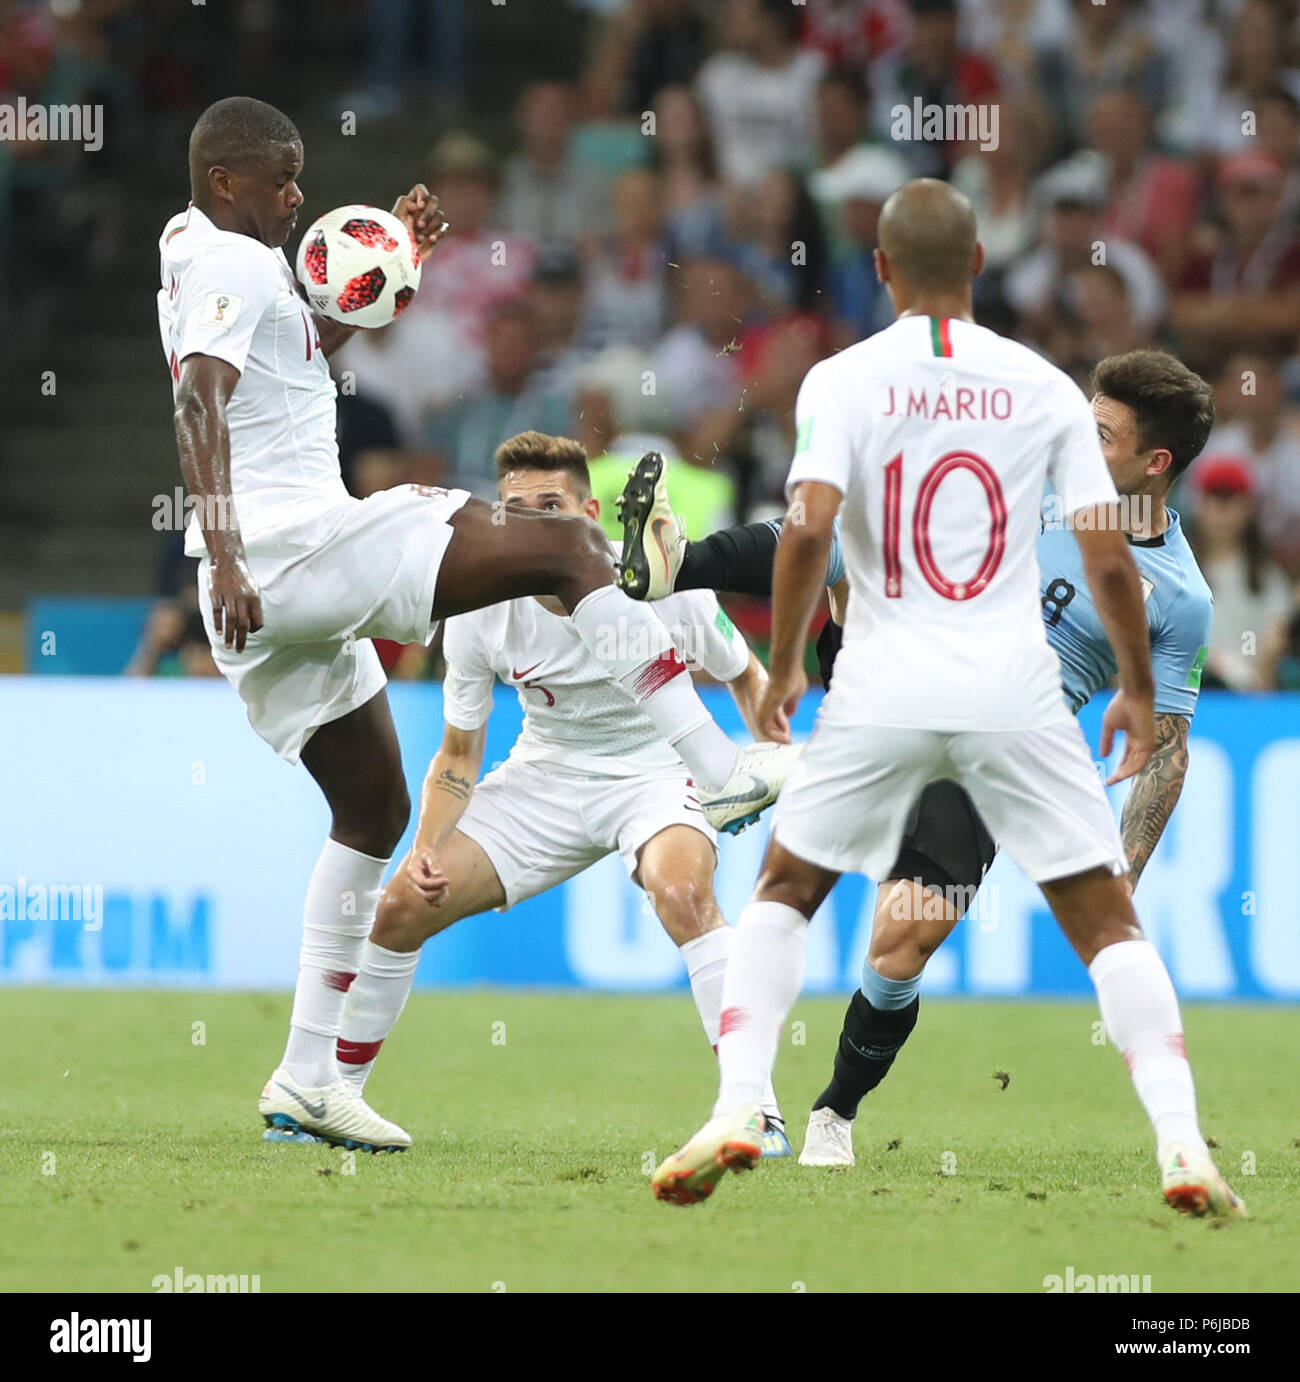 Sochi, Russia. 30th June, 2018. William Carvalho (1st L) of Portugal vies with Nahitan Nandez (1st R) of Uruguay during the 2018 FIFA World Cup round of 16 match between Uruguay and Portugal in Sochi, Russia, June 30, 2018. Credit: Fei Maohua/Xinhua/Alamy Live News Stock Photo